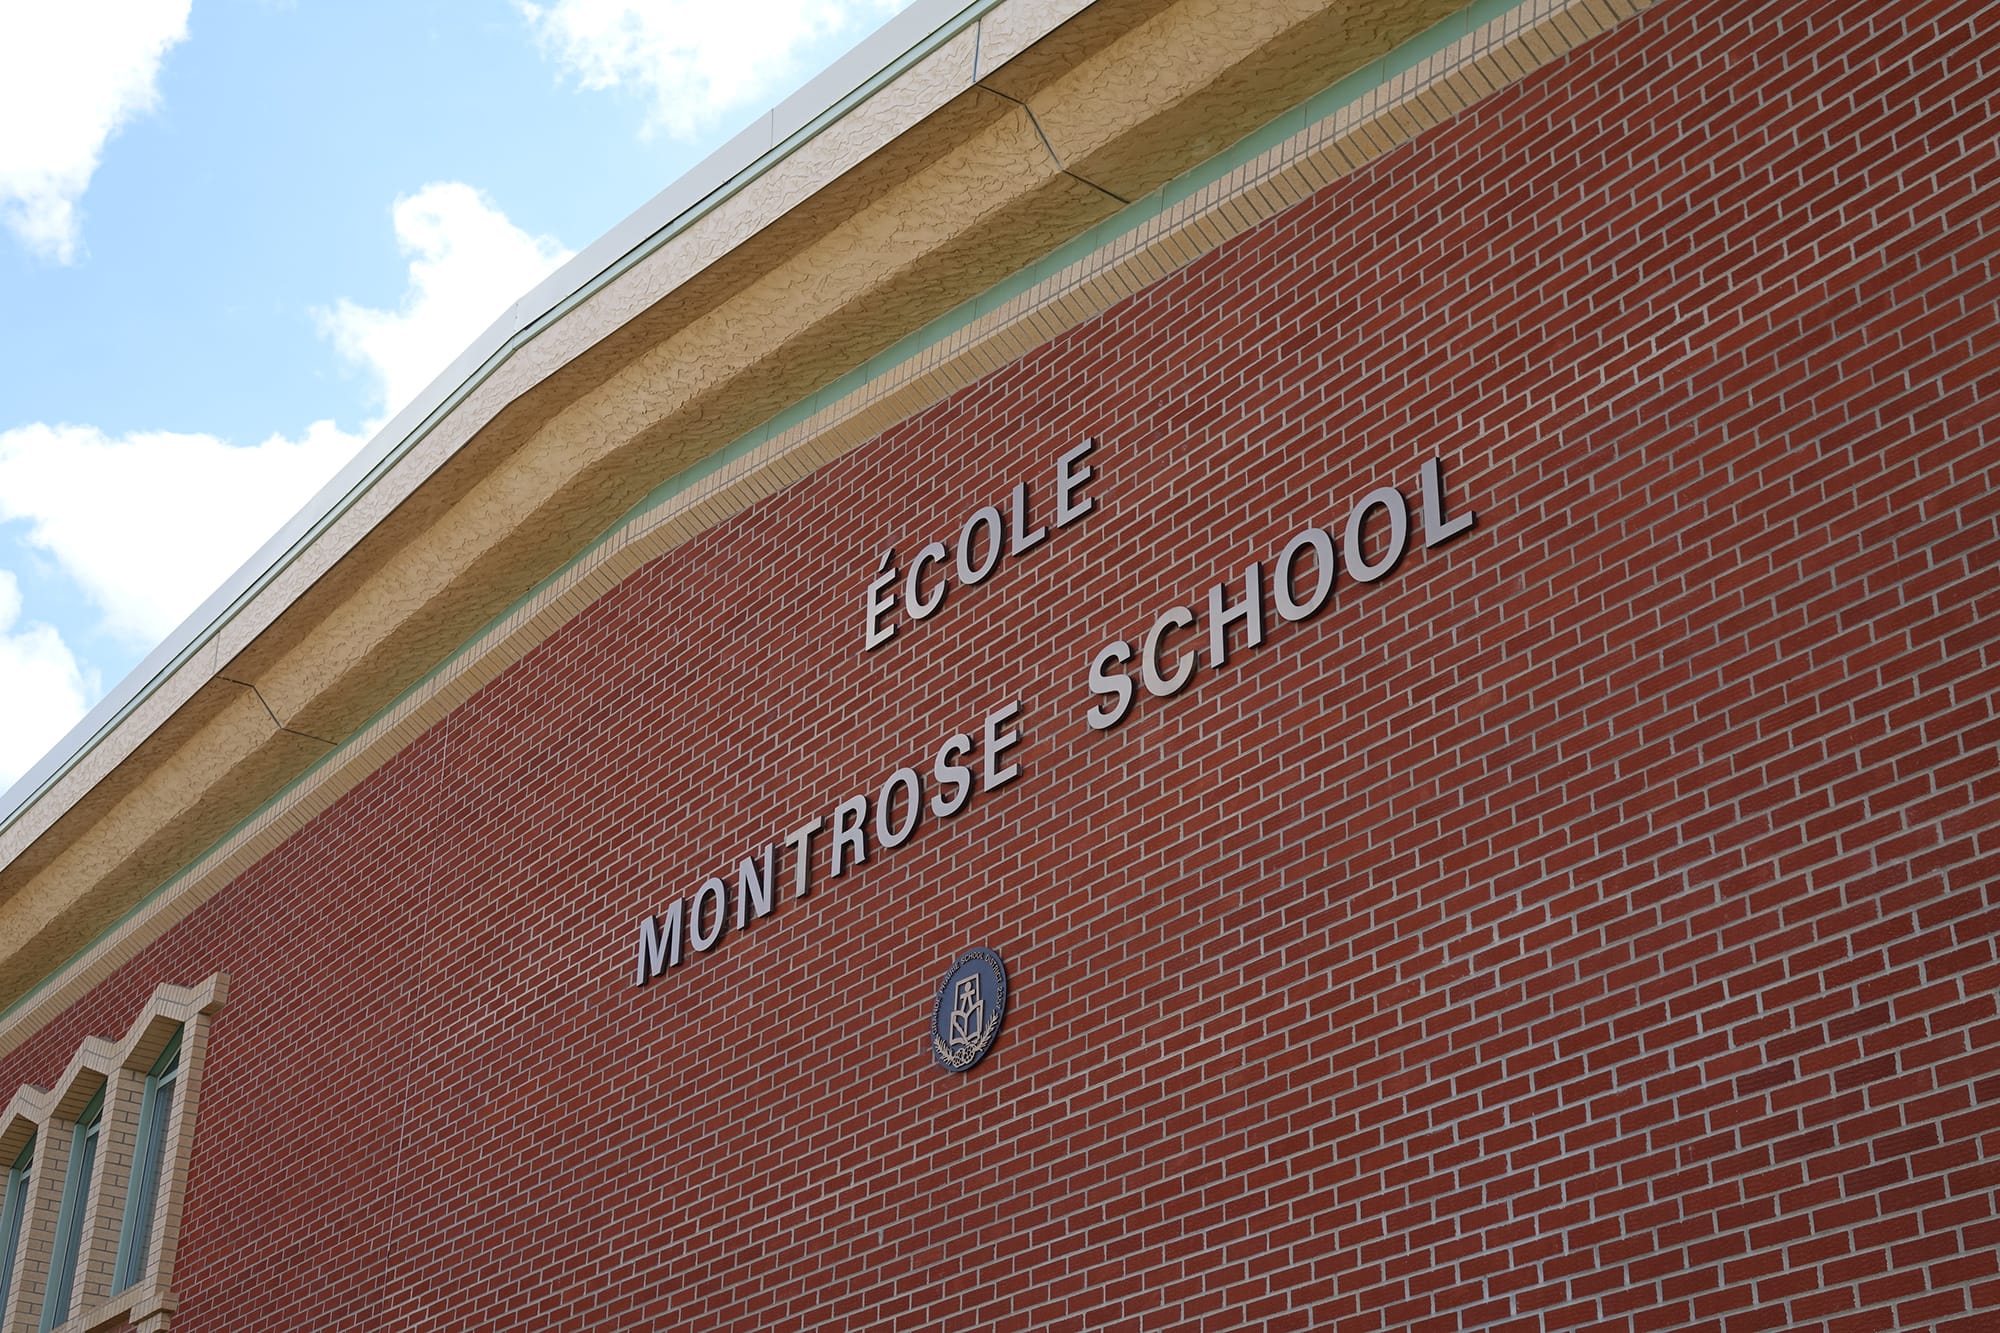 École Montrose Junior High School exterior wall and signage